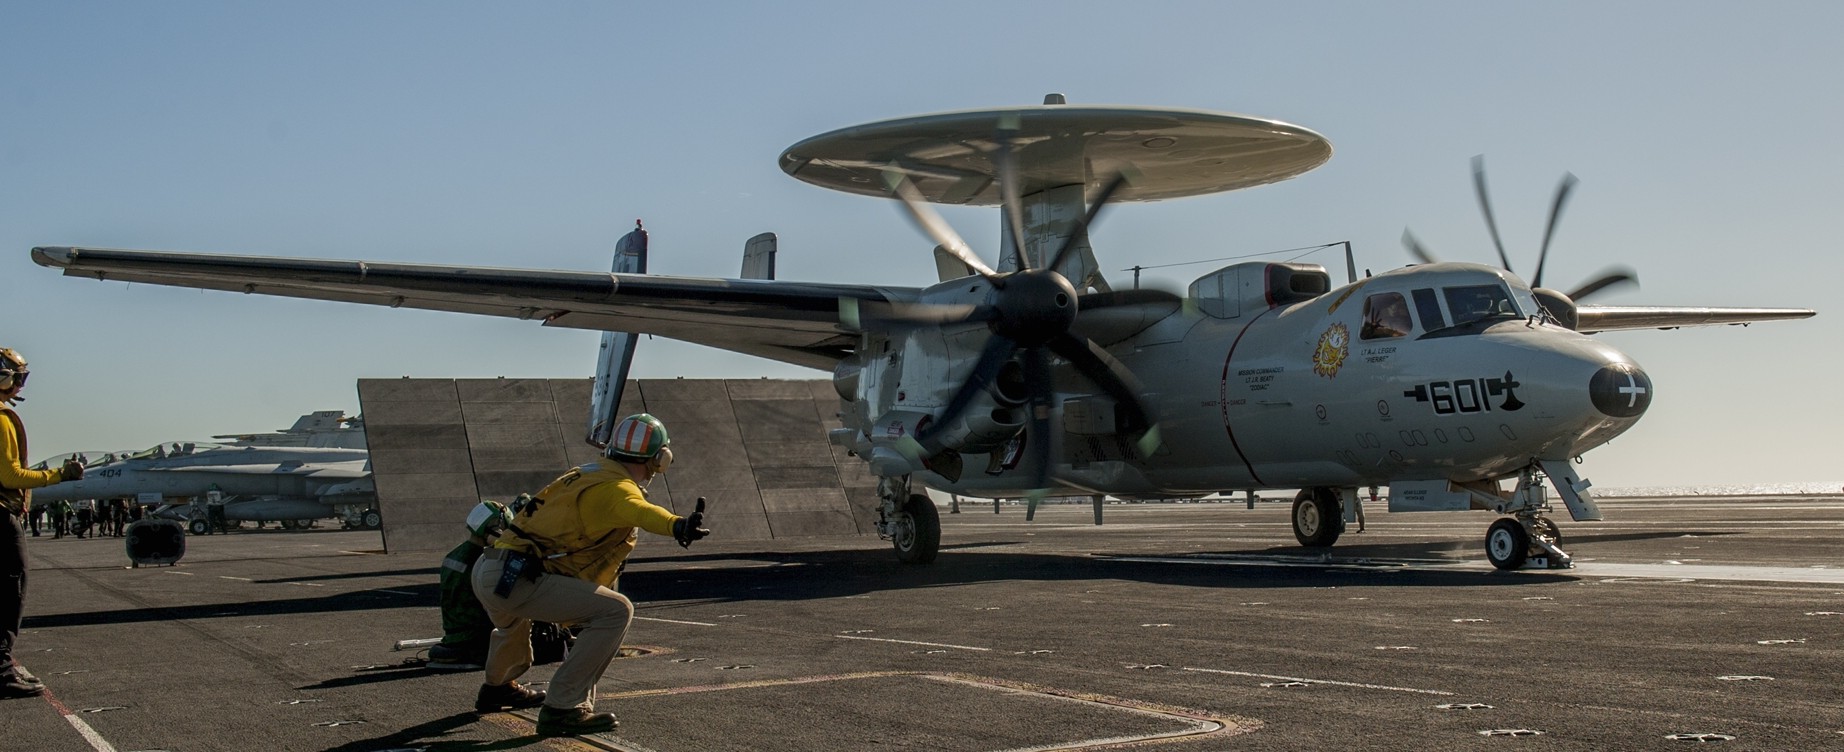 vaw-116 sun kings airborne command control squadron carrier early warning cvw-17 uss carl vinson cvn-70 49